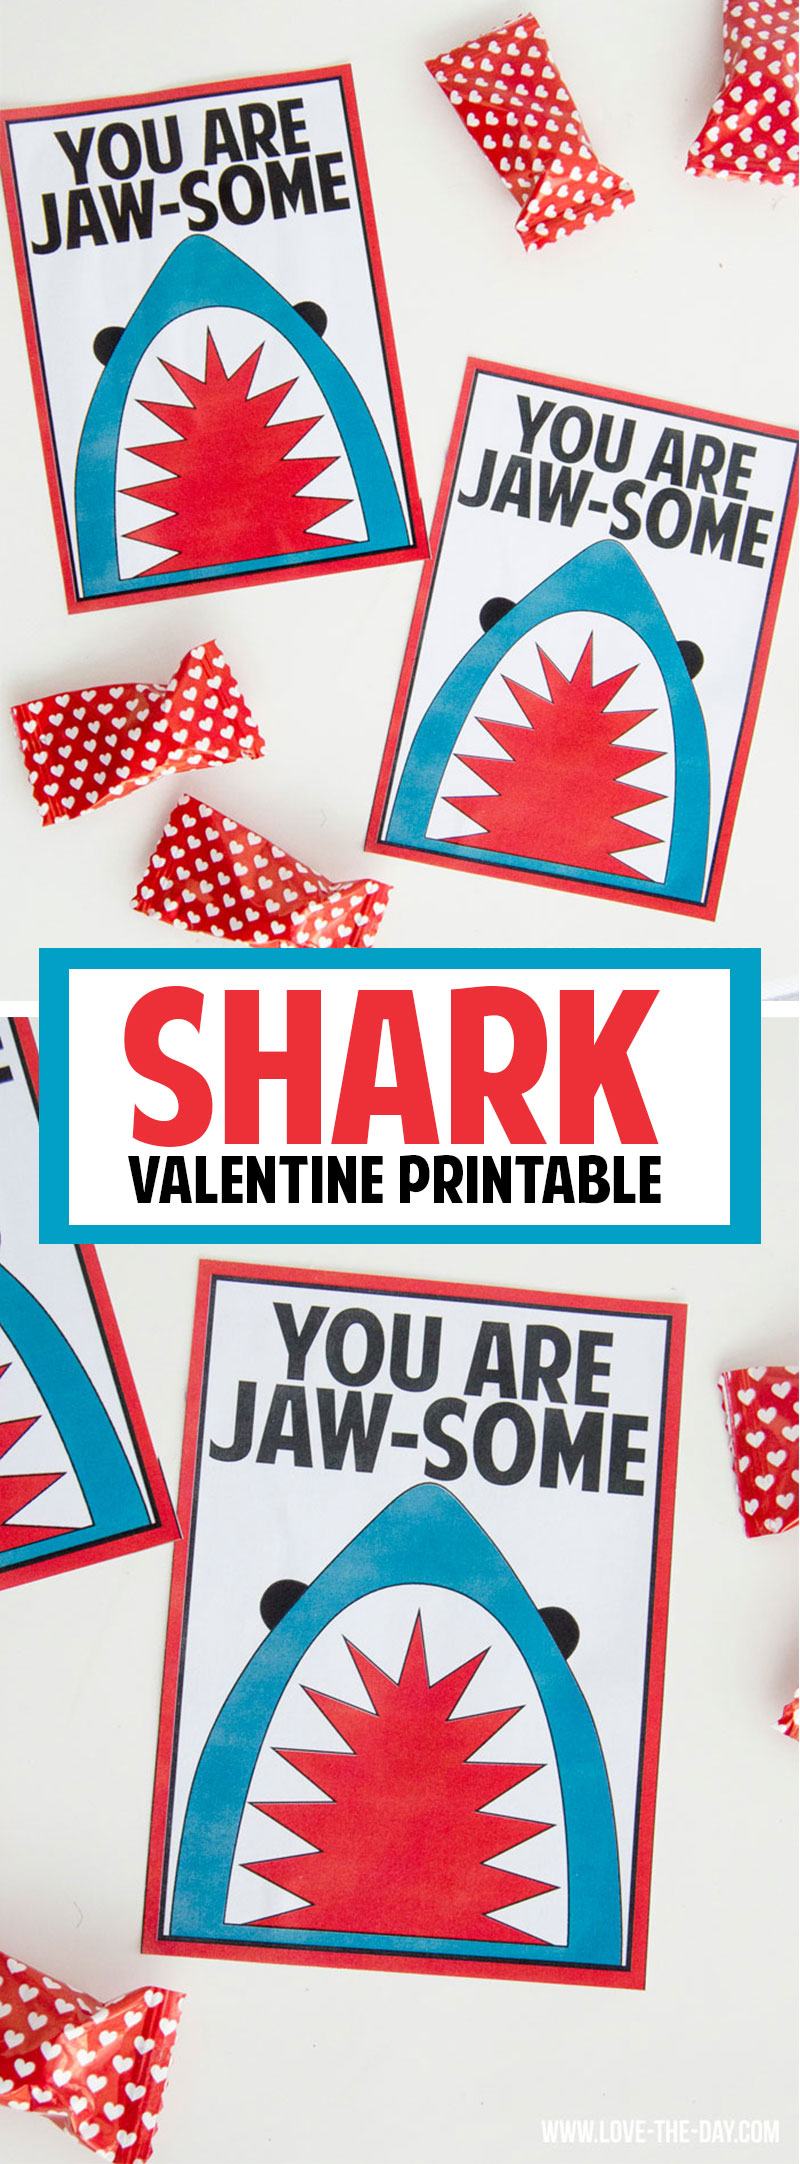 Shark Valentine Printable by Lindi Haws of Love The Day